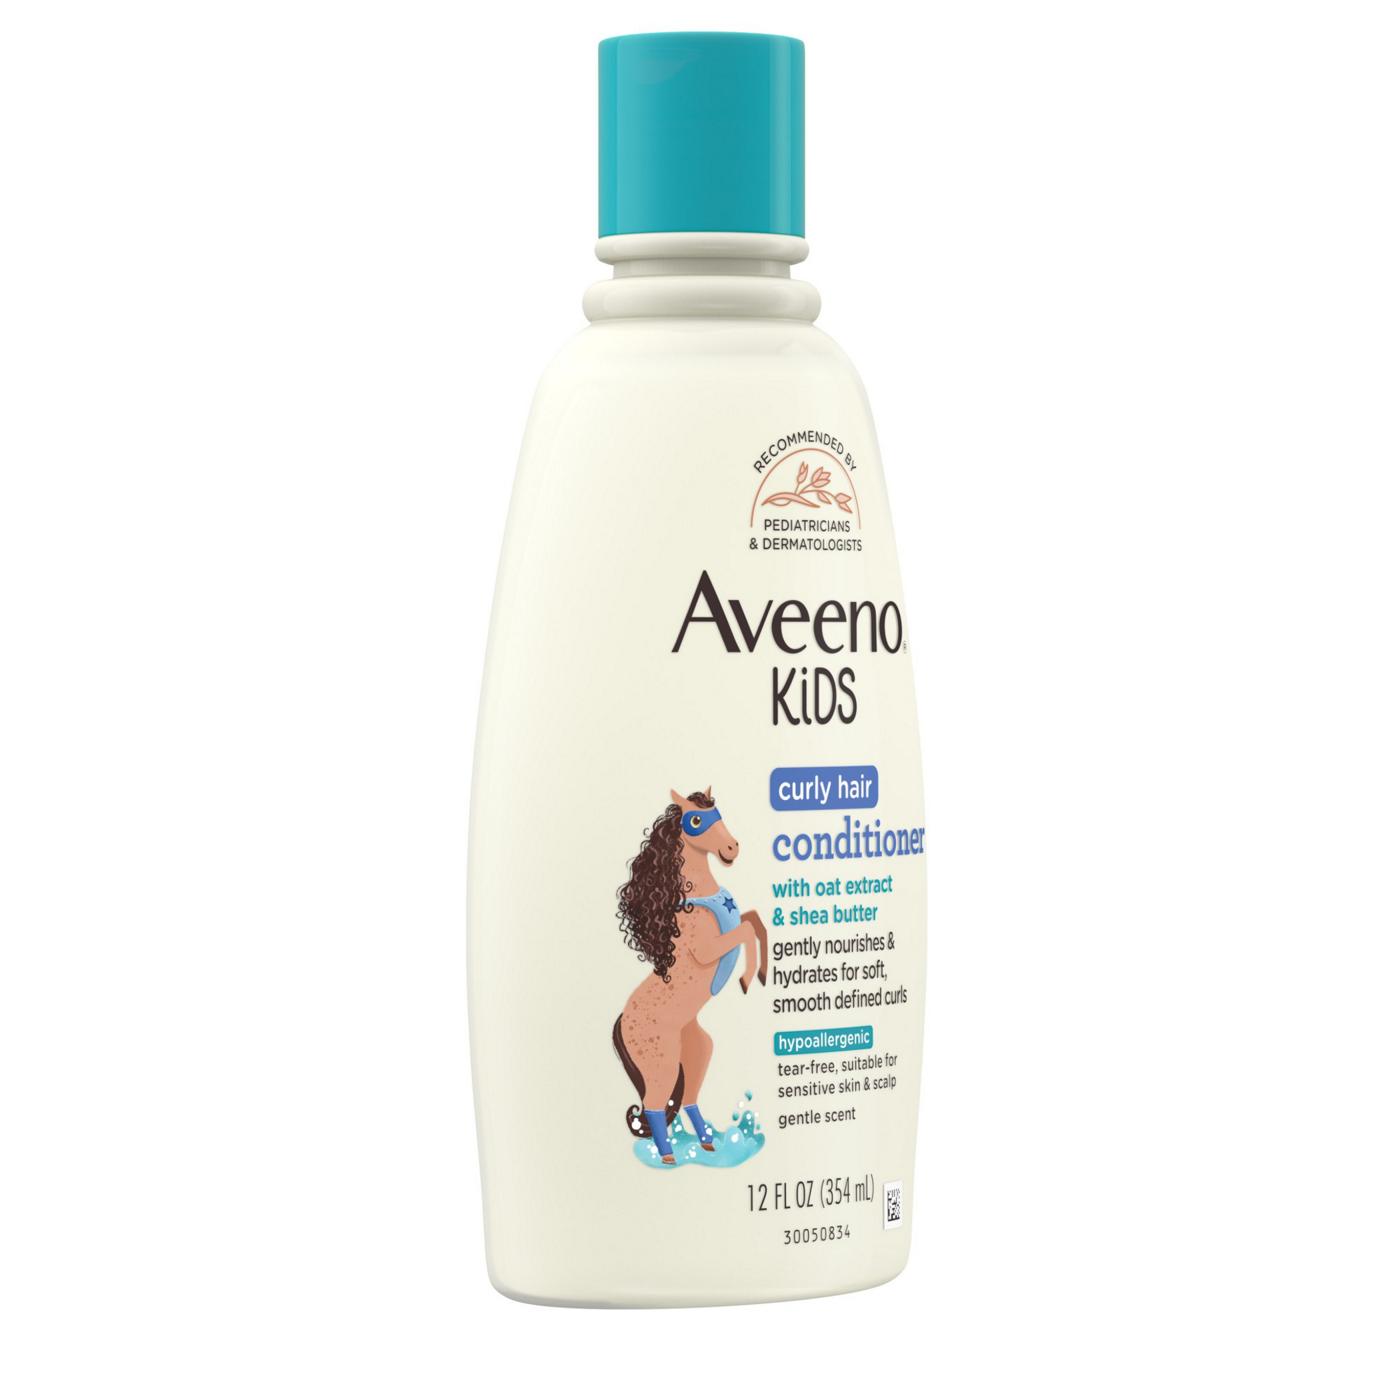 Aveeno Kids Curly Hair Conditioner; image 3 of 5